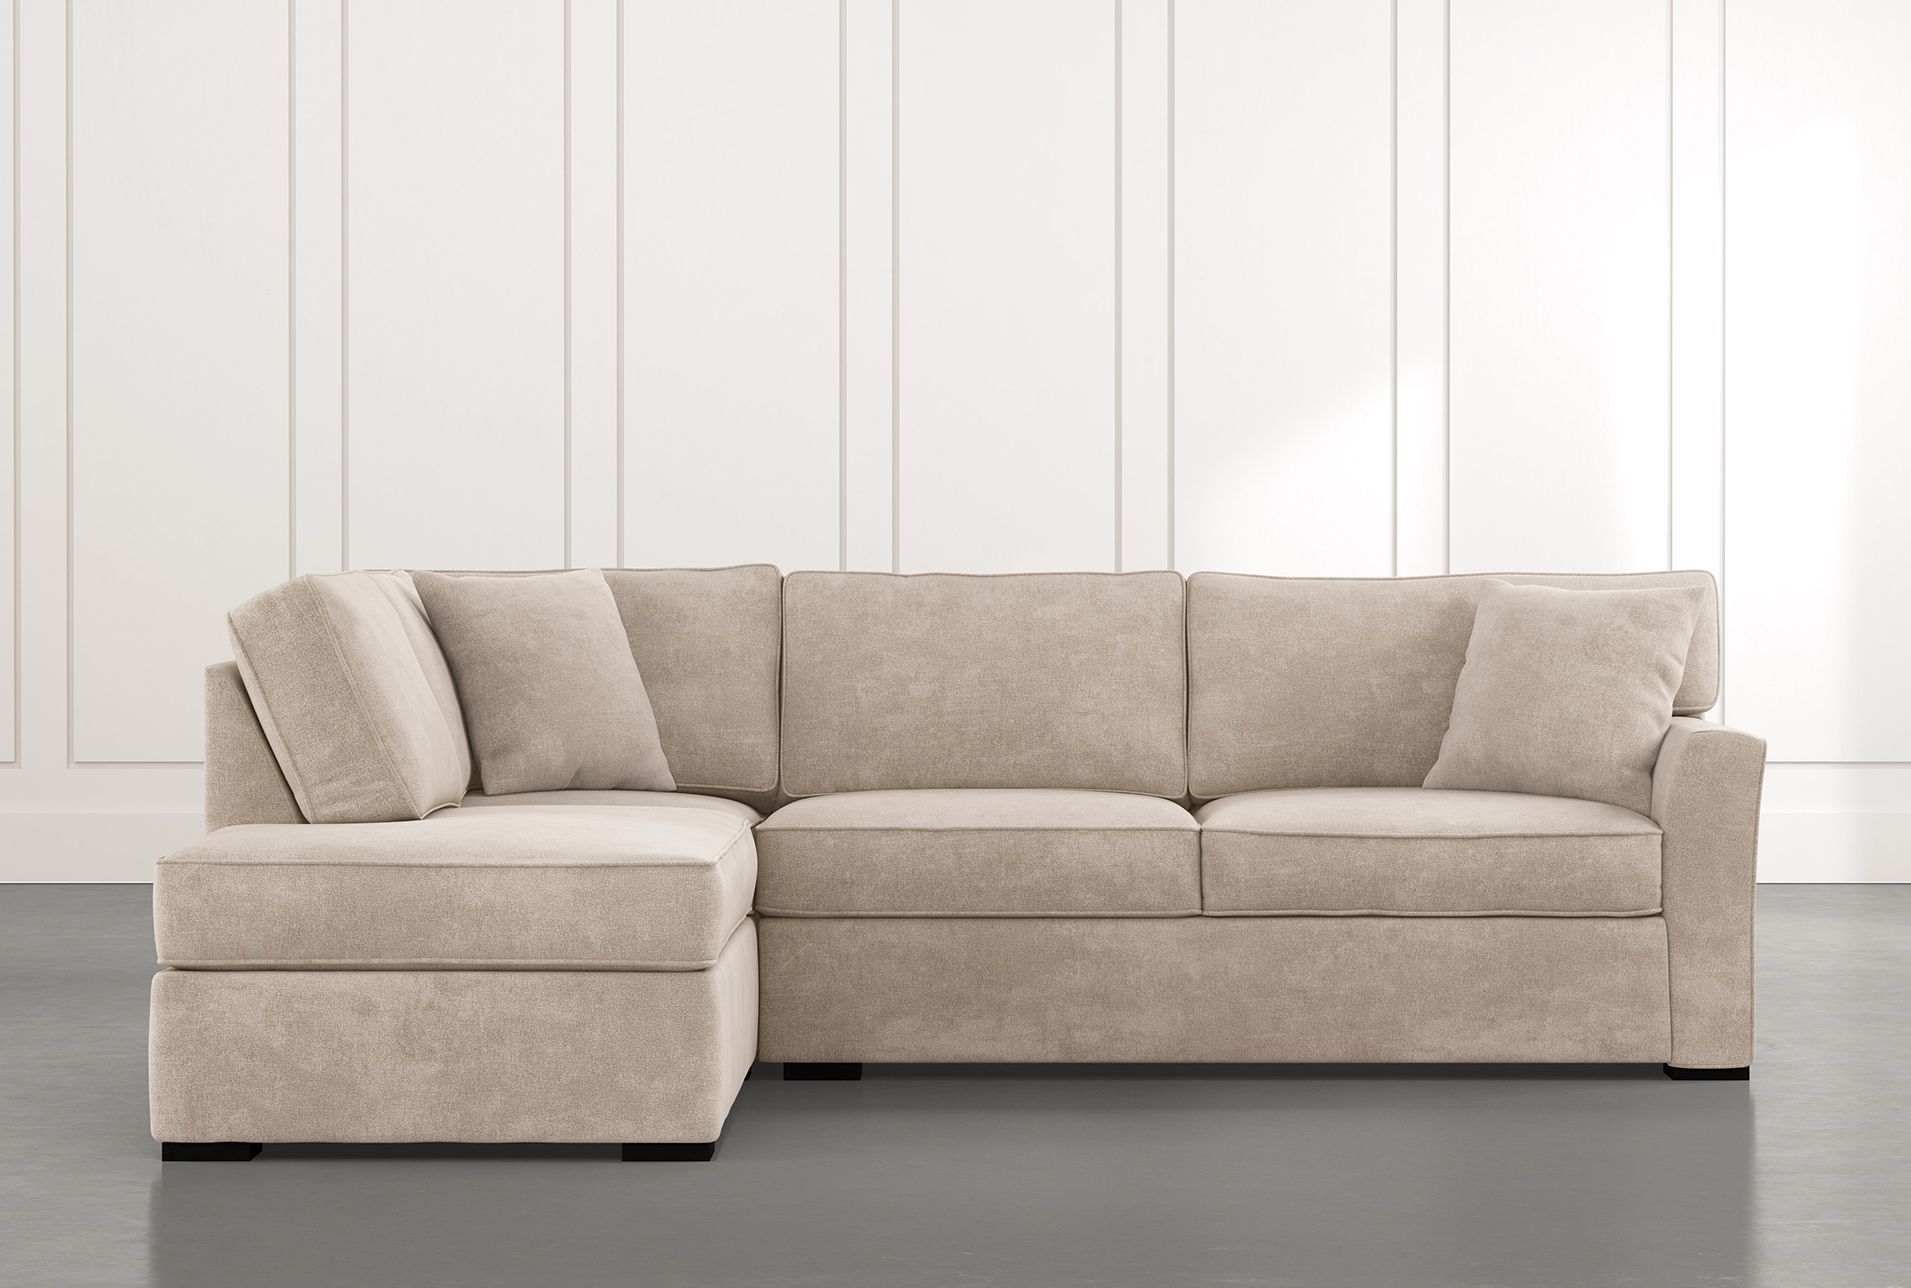 Aspen Beige 2 Piece Sleeper Sectional With Left Arm Facing Chaise Inside Left Or Right Facing Sleeper Sectionals (Gallery 20 of 21)